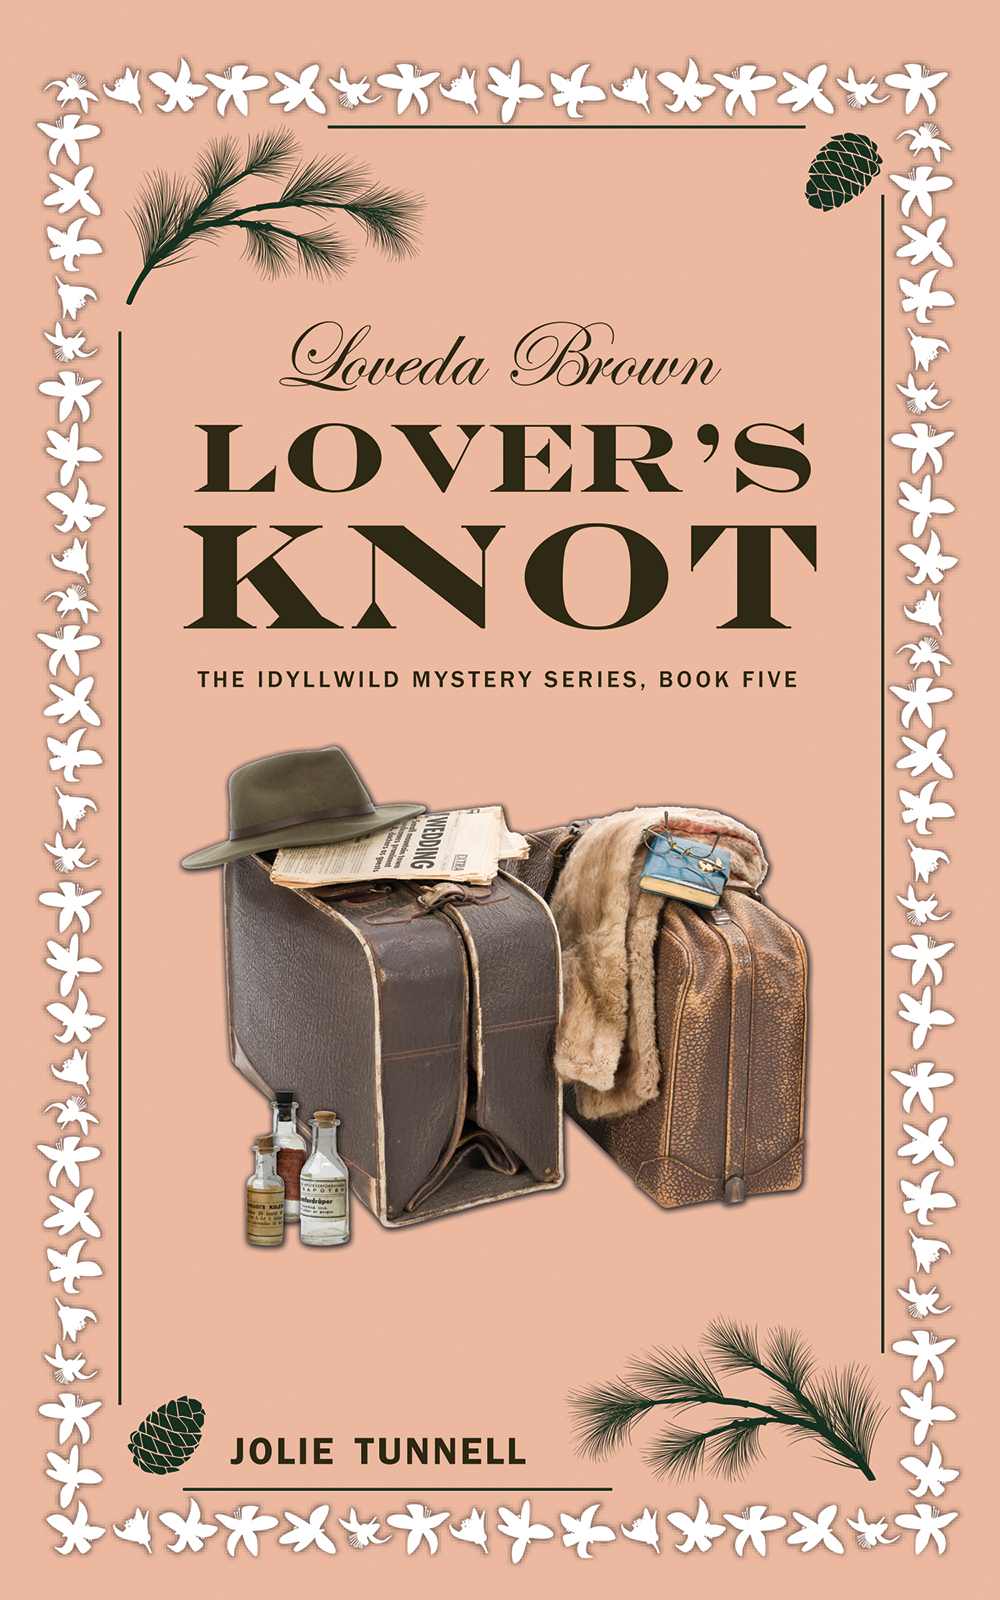 FREE: Loveda Brown: Lover’s Knot by Jolie Tunnell